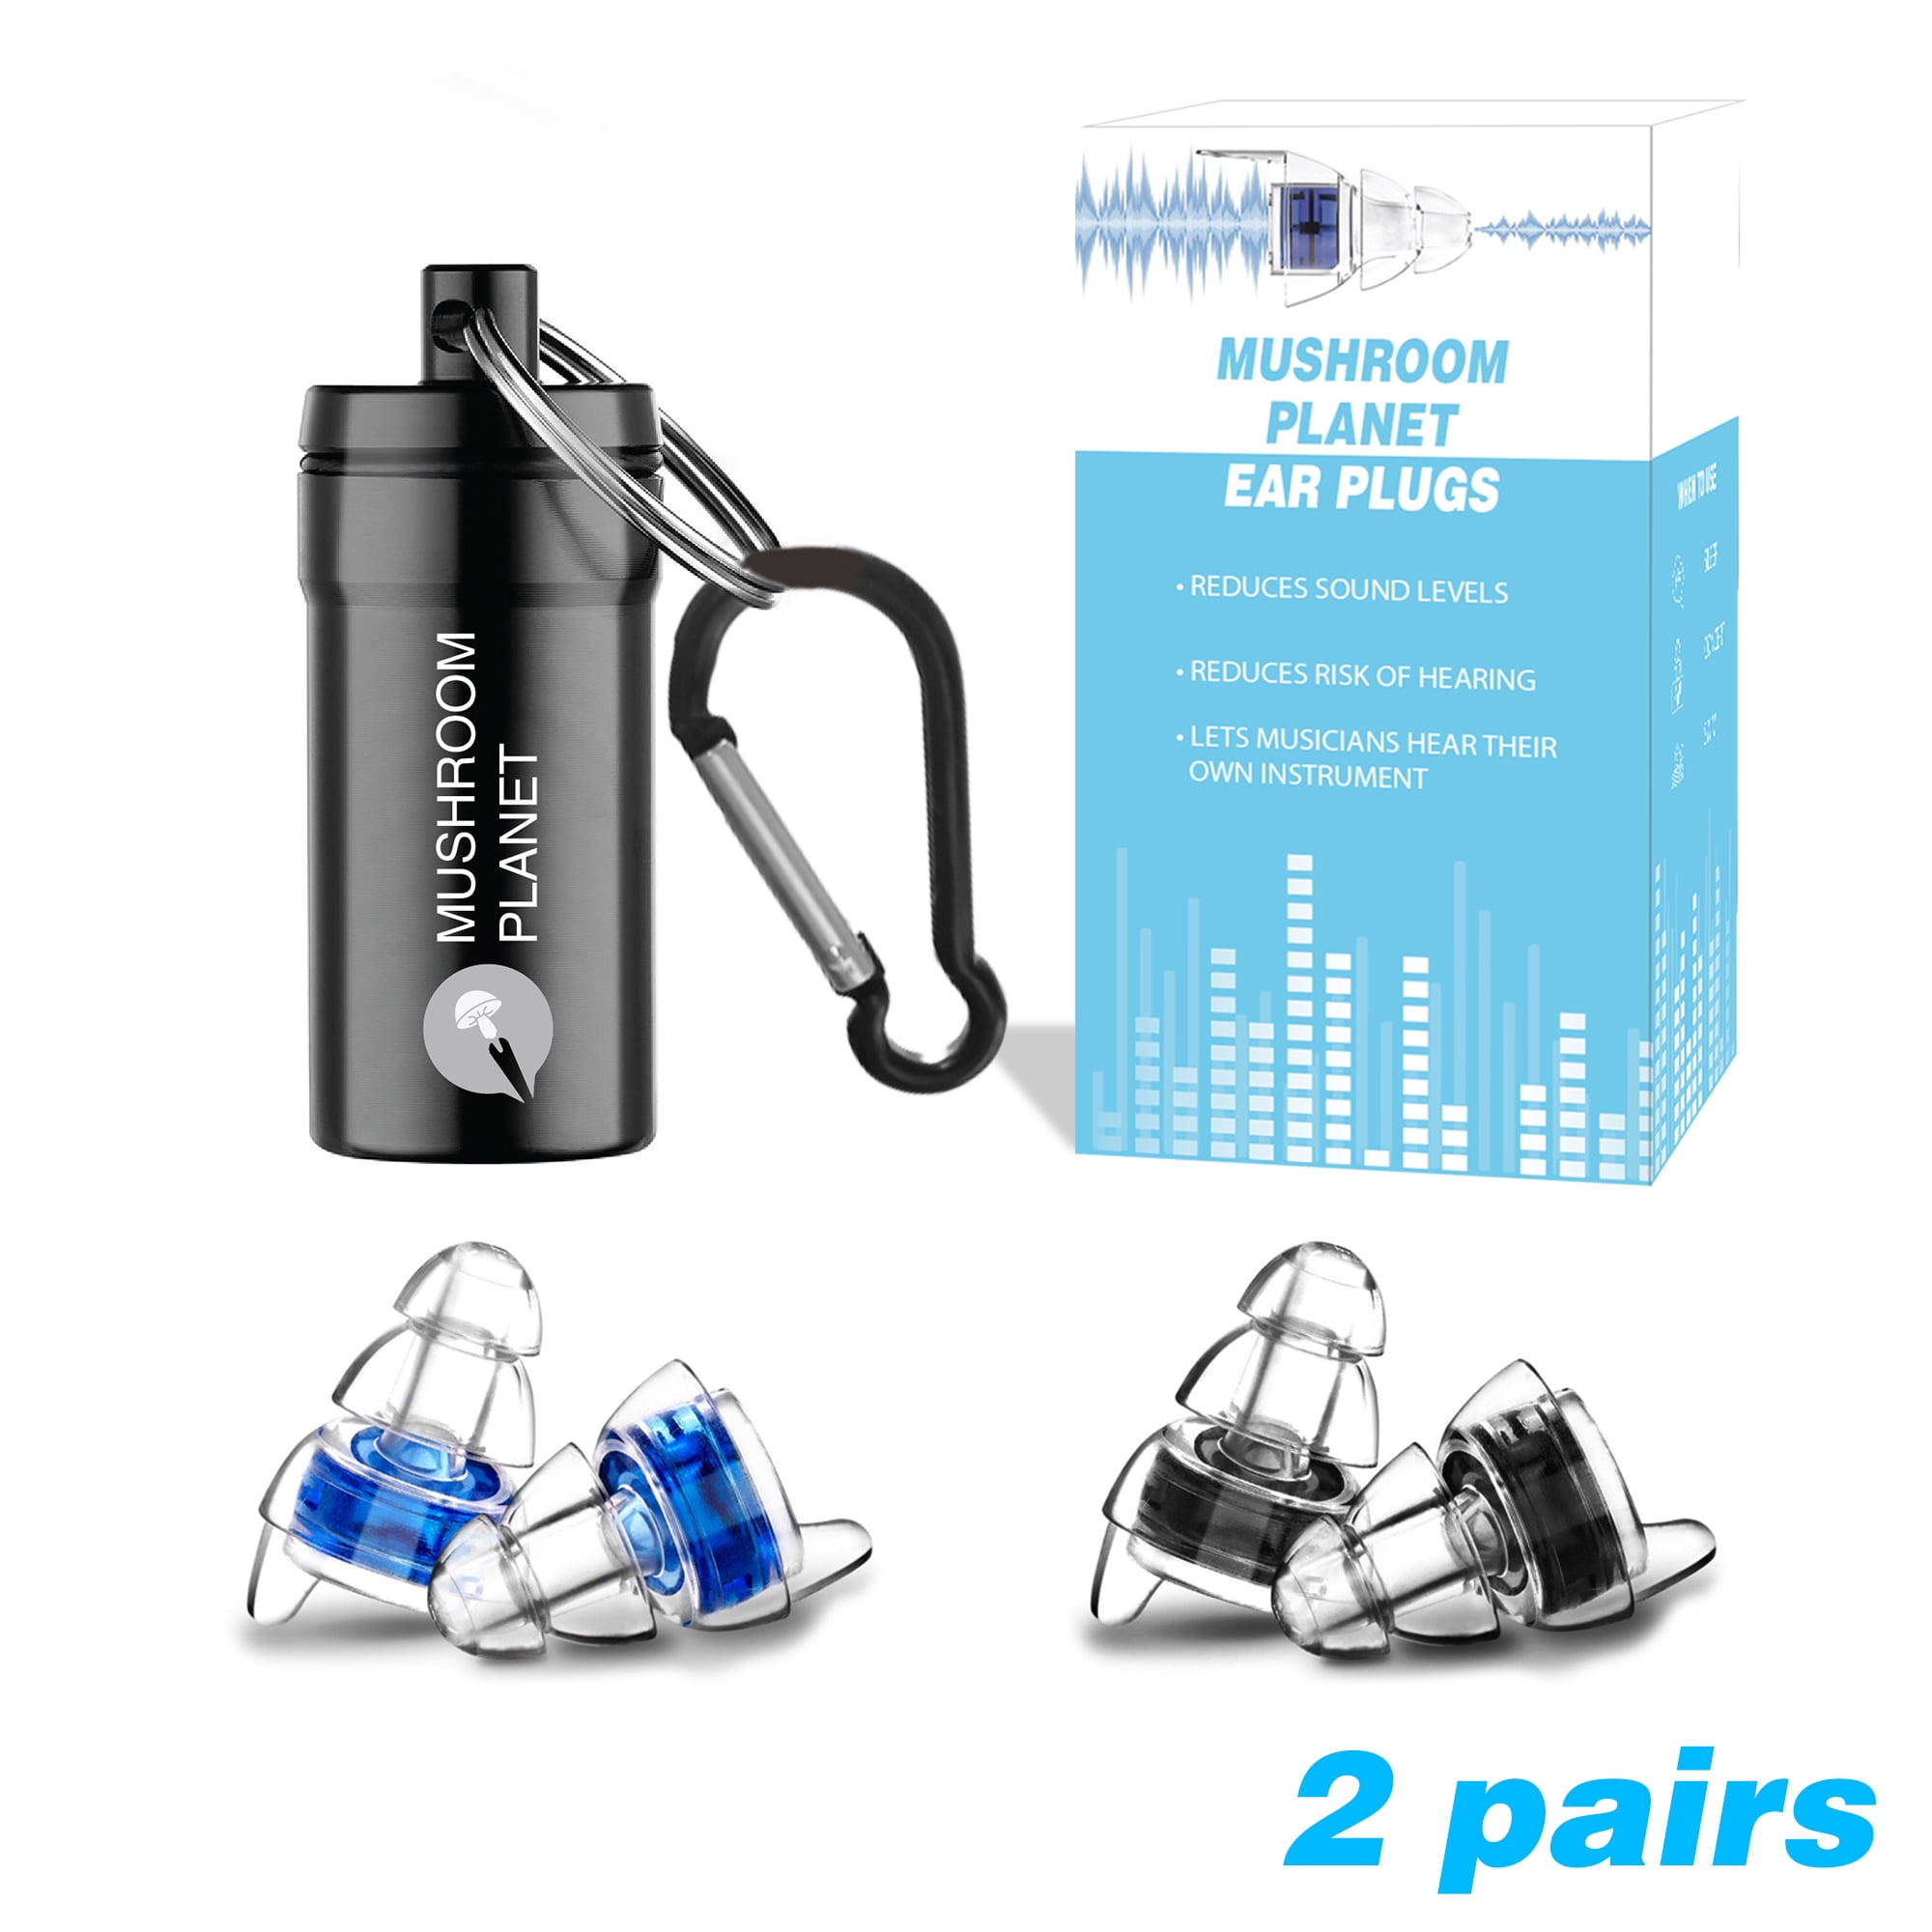 3 Pairs Filters Concert Ear Plugs Noise Cancelling DJ Musicians Drummer Clubbing 